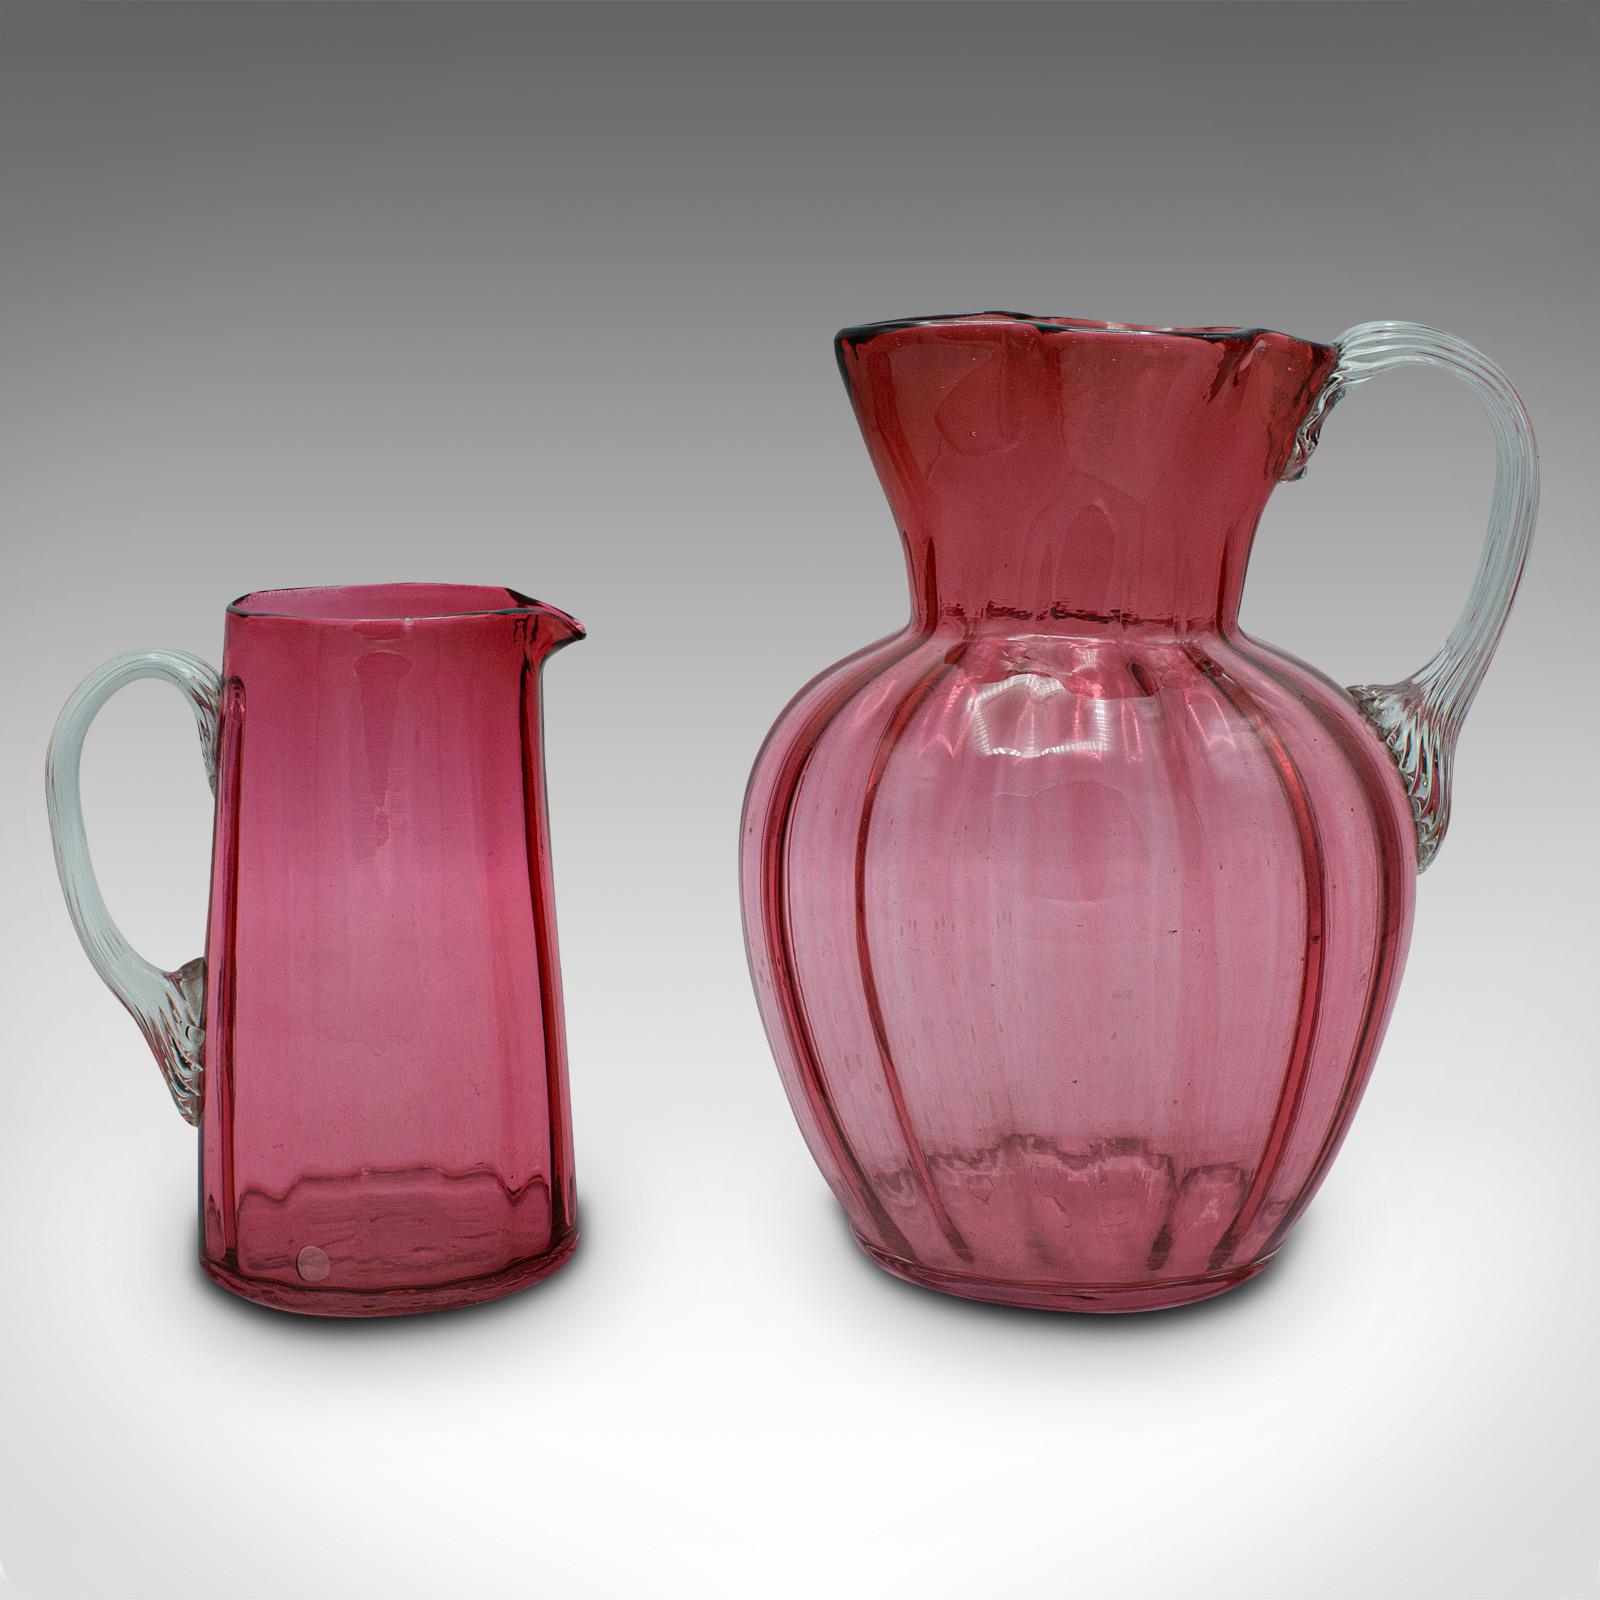 This is a vintage cordial mixer set. An English, cranberry glass pouring jug duo, dating to the early 20th century, circa 1930.

Add colour and flair to a summer drinks gathering
Displays a desirable aged patina and in good order
Bright